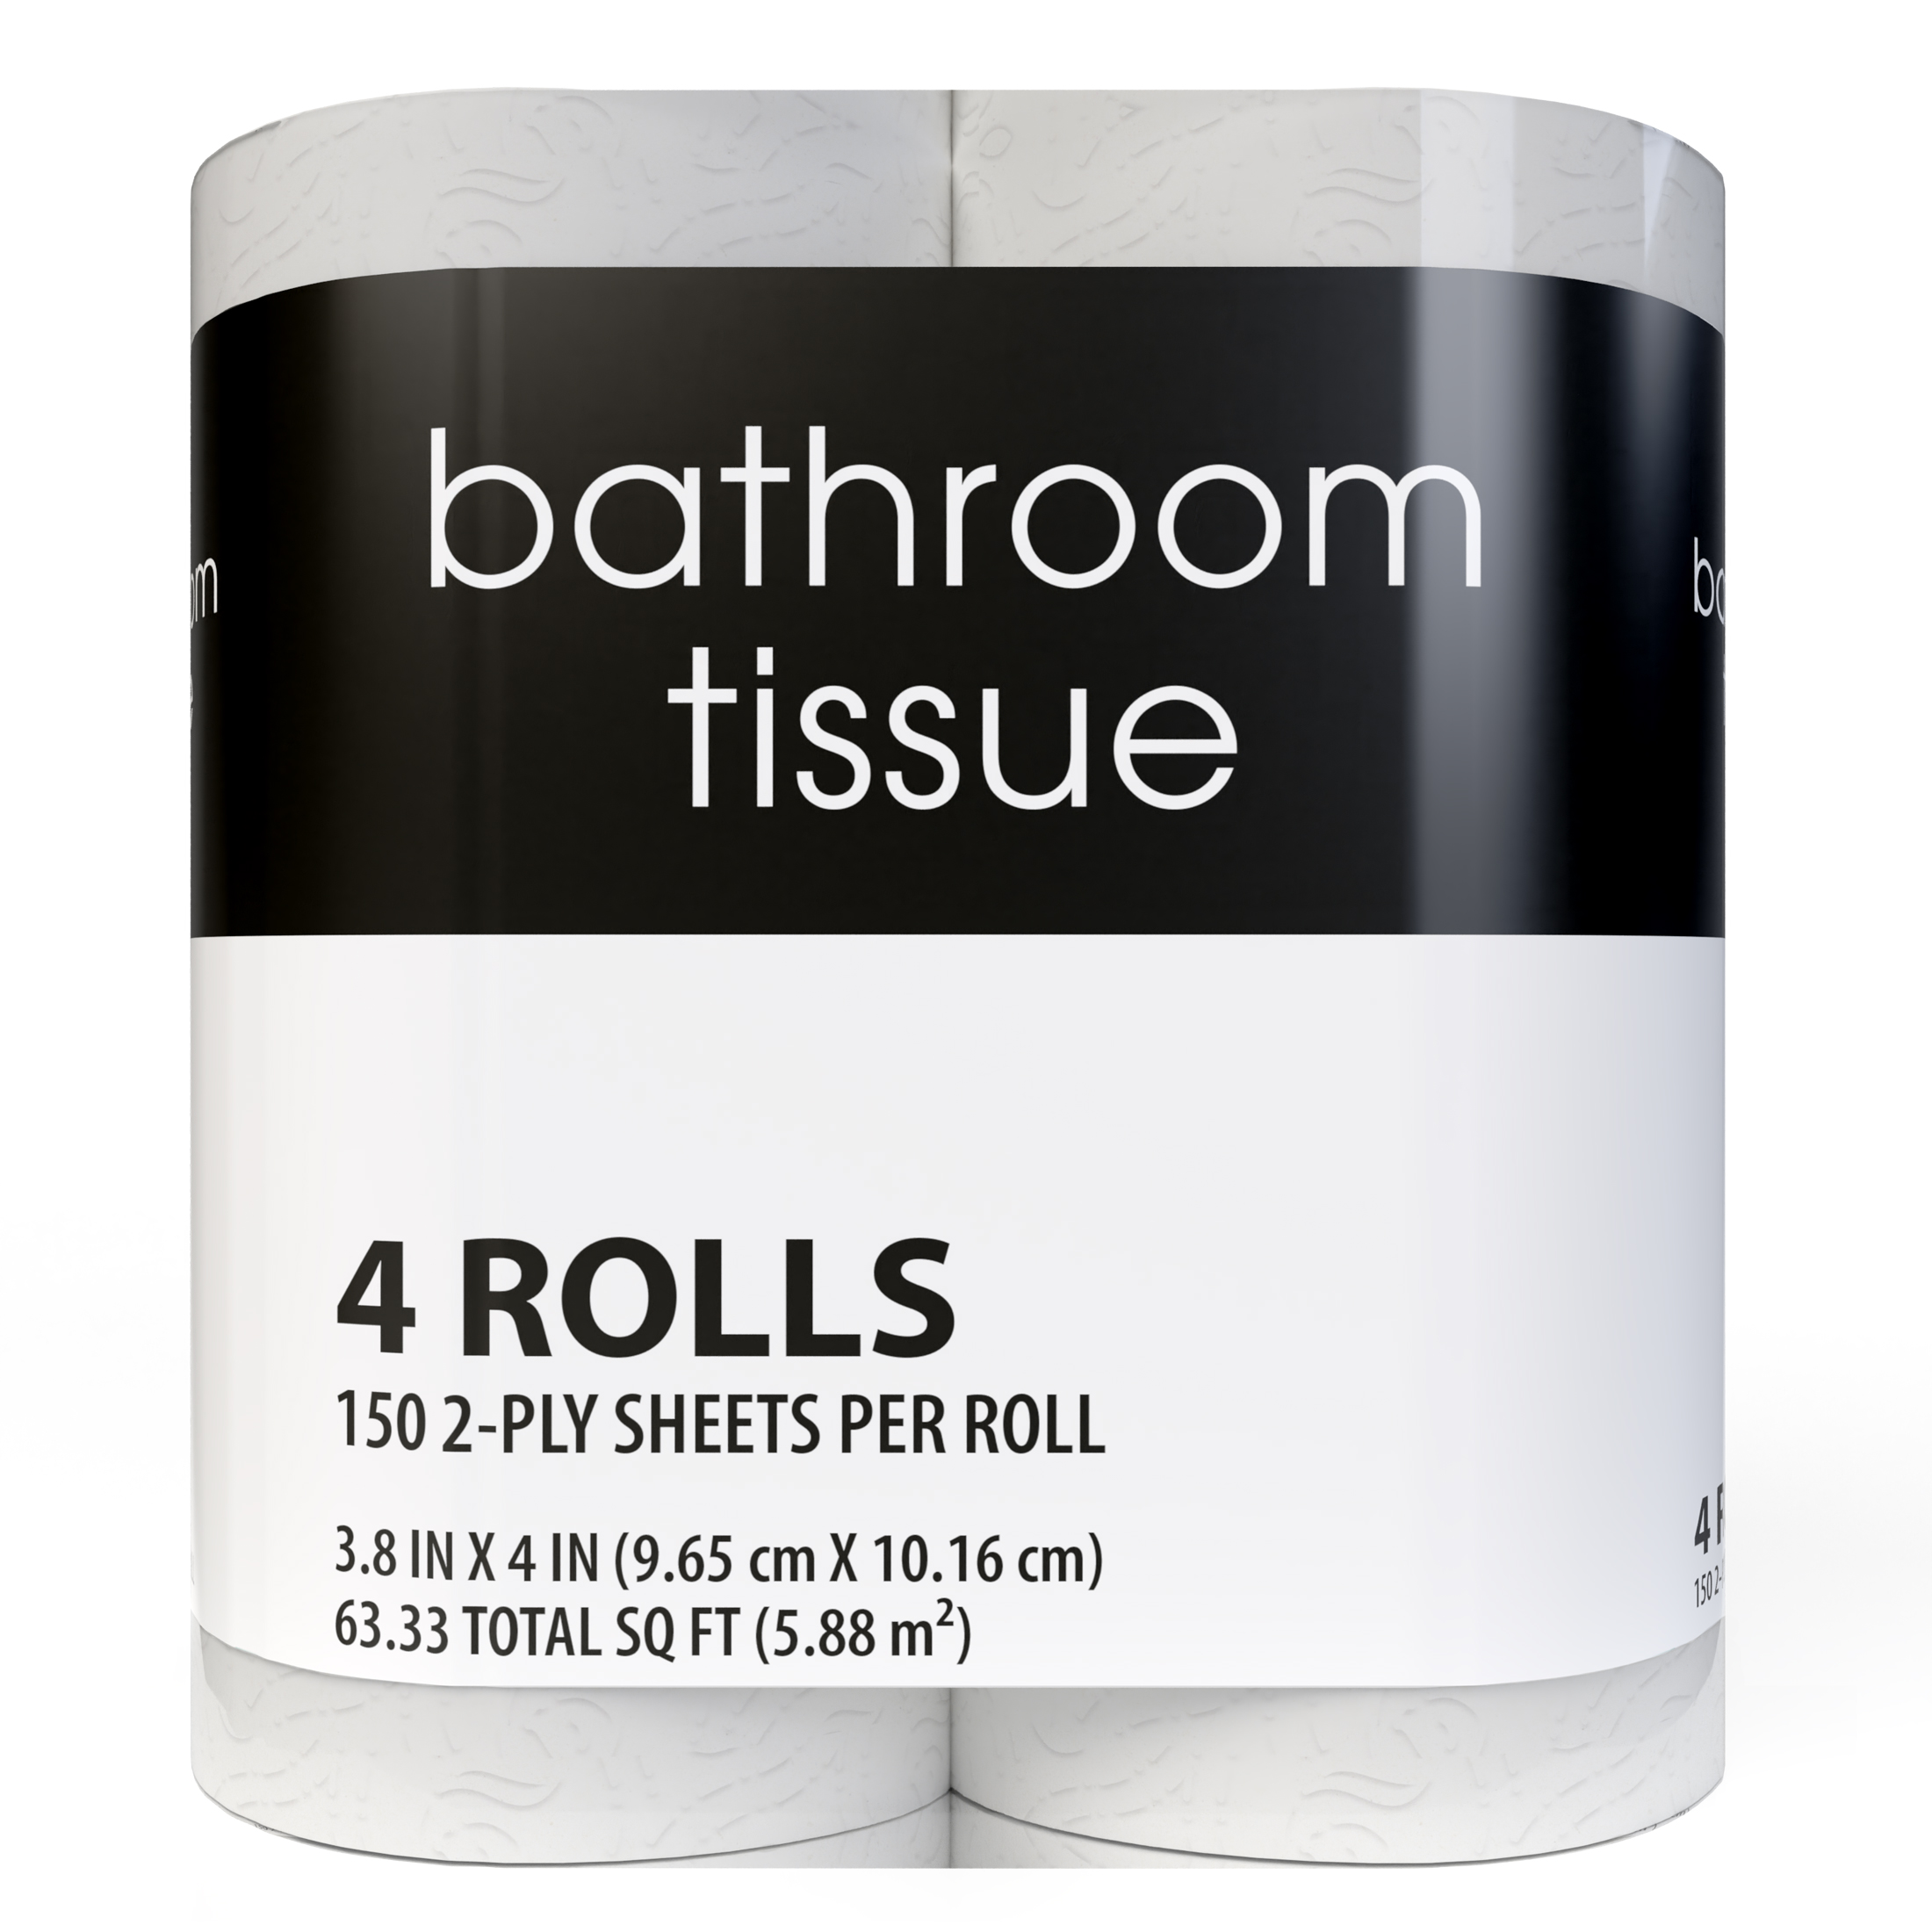 Toilet Paper, 4 Rolls, 150 2-Ply Sheets per Roll - image 2 of 4